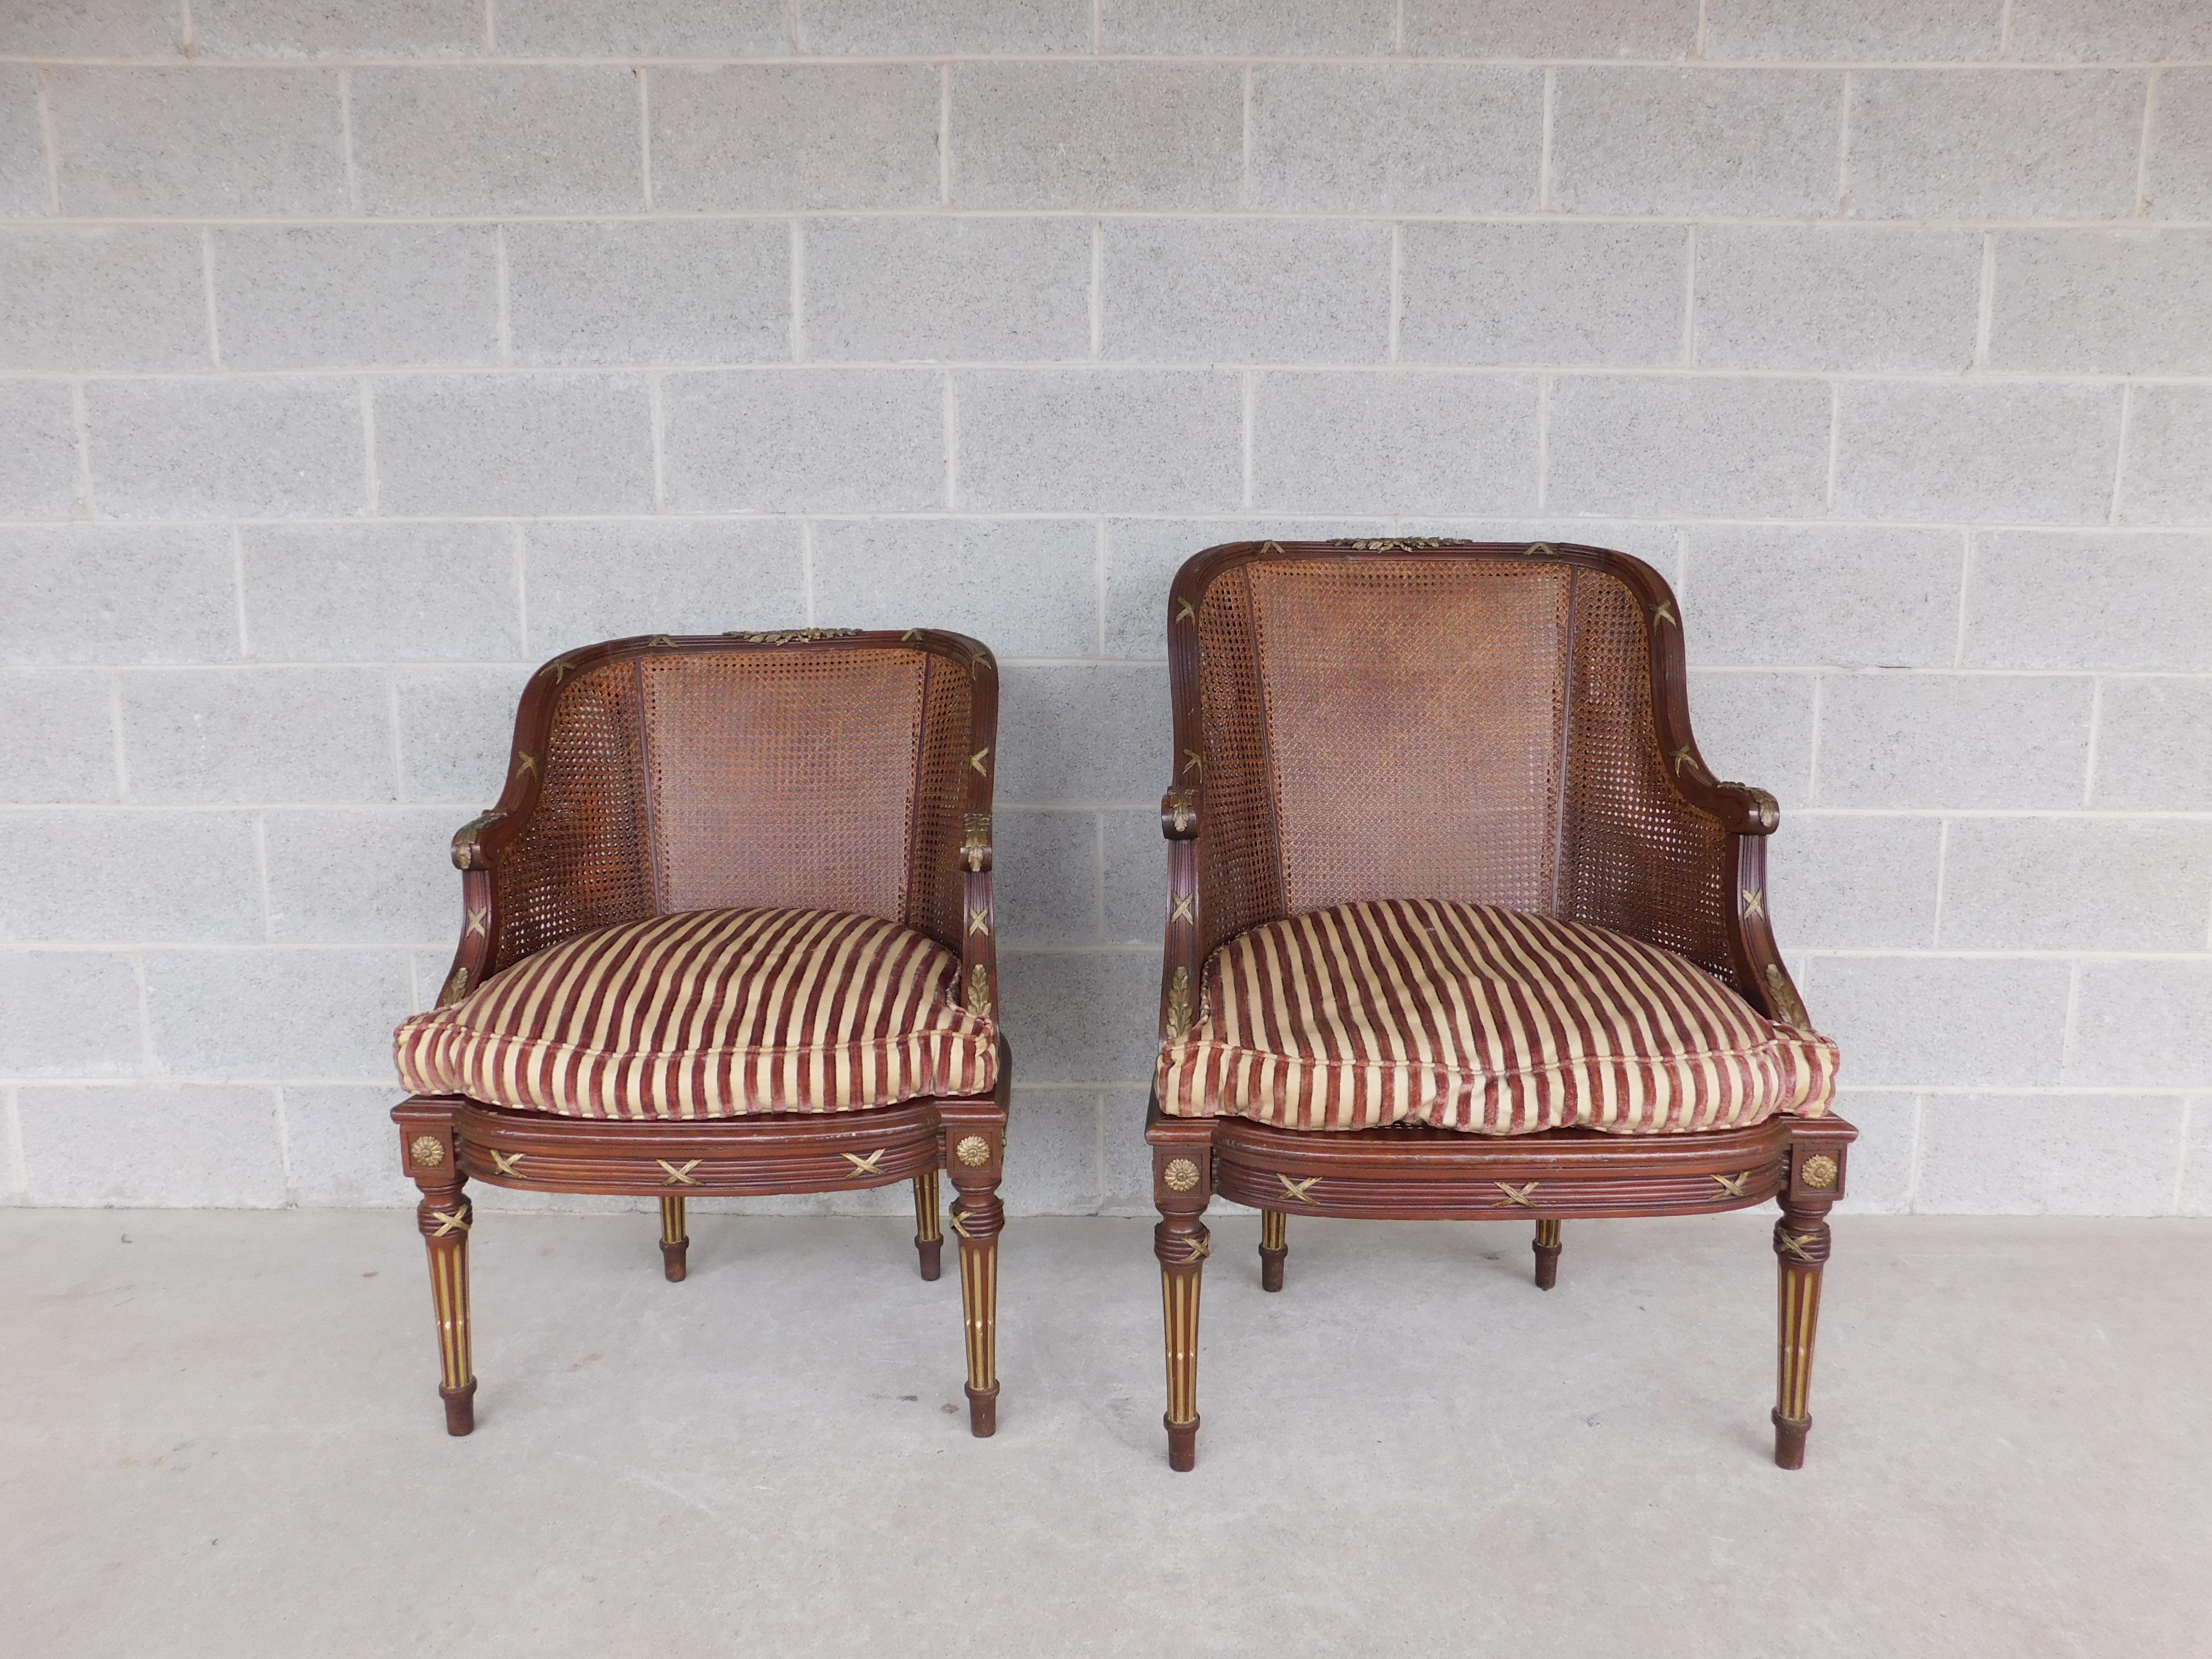 circa early 19th century French Louis XVI Ormolu Mounted Accent Bergere Chairs, Caned Barrel Form Front and Back of the Back Rest, Caned Seat Bottom, Loose Chanelle Type Material Down Filled Cushion, Detailed Bronze Mounted Bow Tied Laurel Motif on